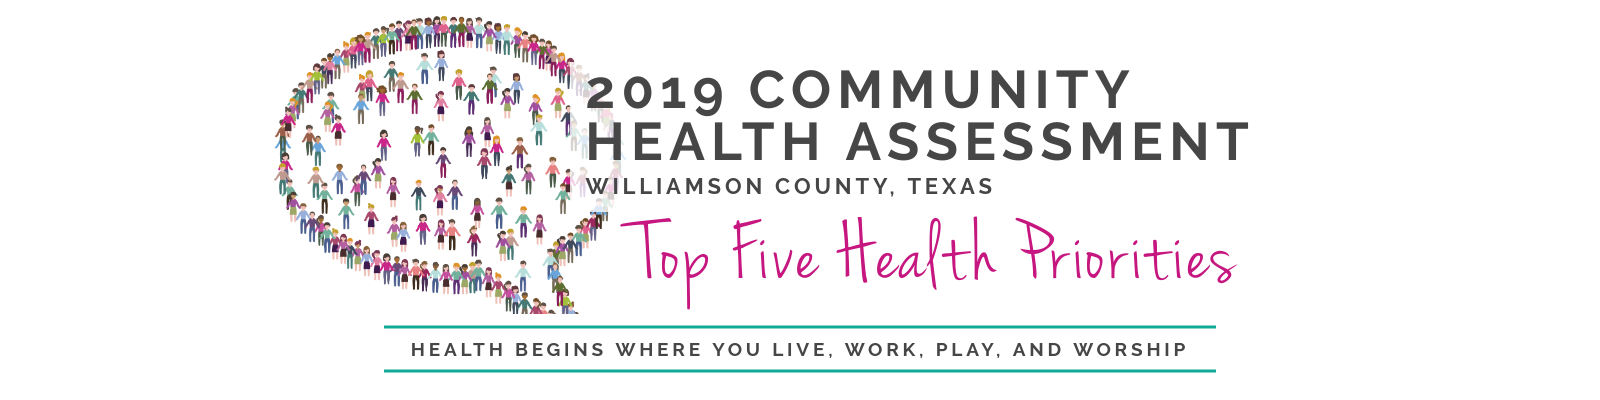 2019 Community Health Assessment, Williamson County, Texas. Top Five Health Priorities. Health begins where you live, work, play, and worship.